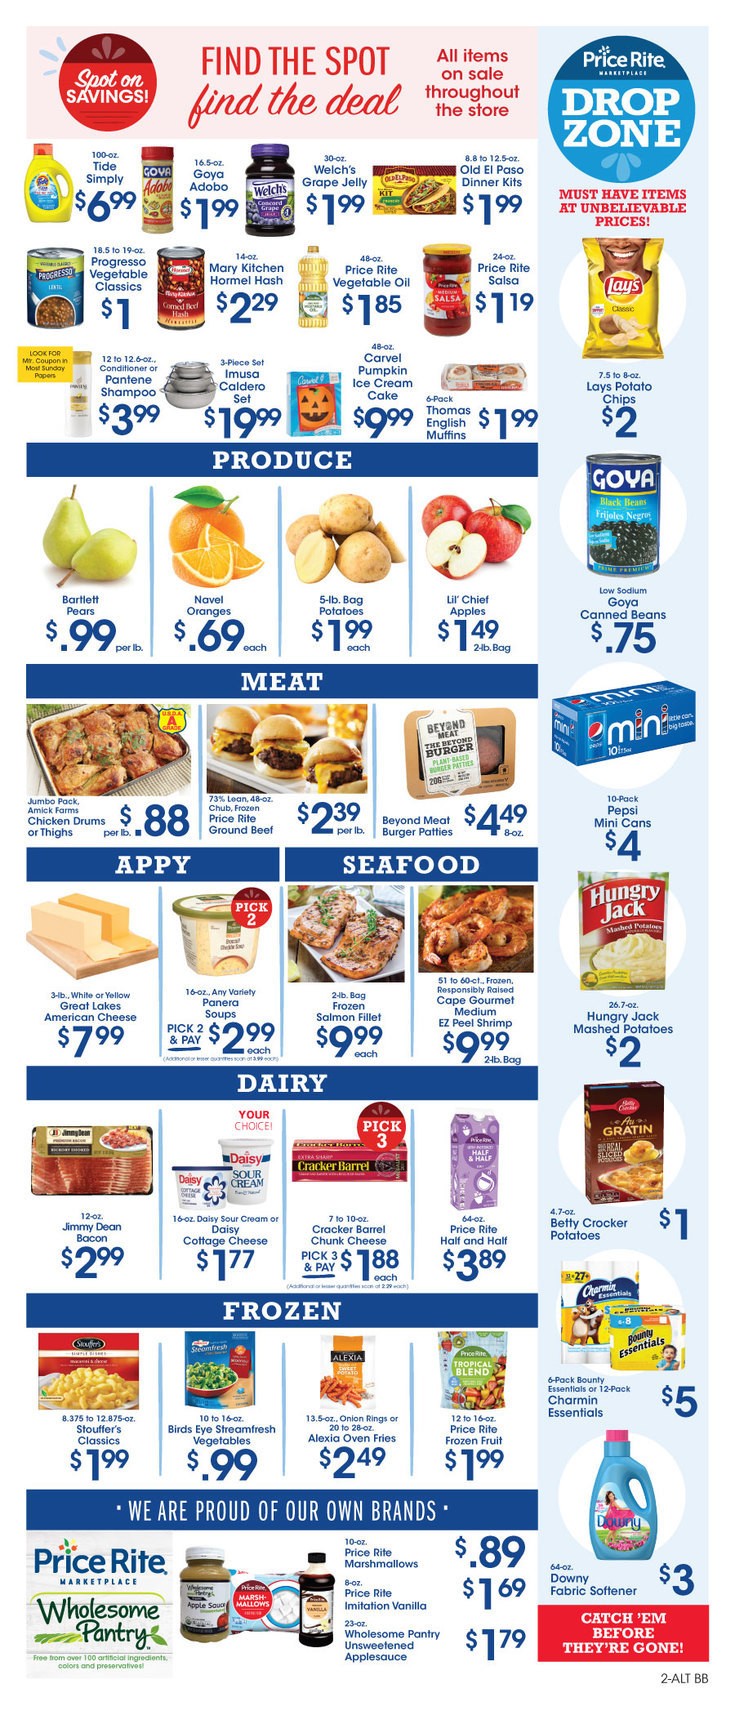 Price Rite Weekly Ad from October 25